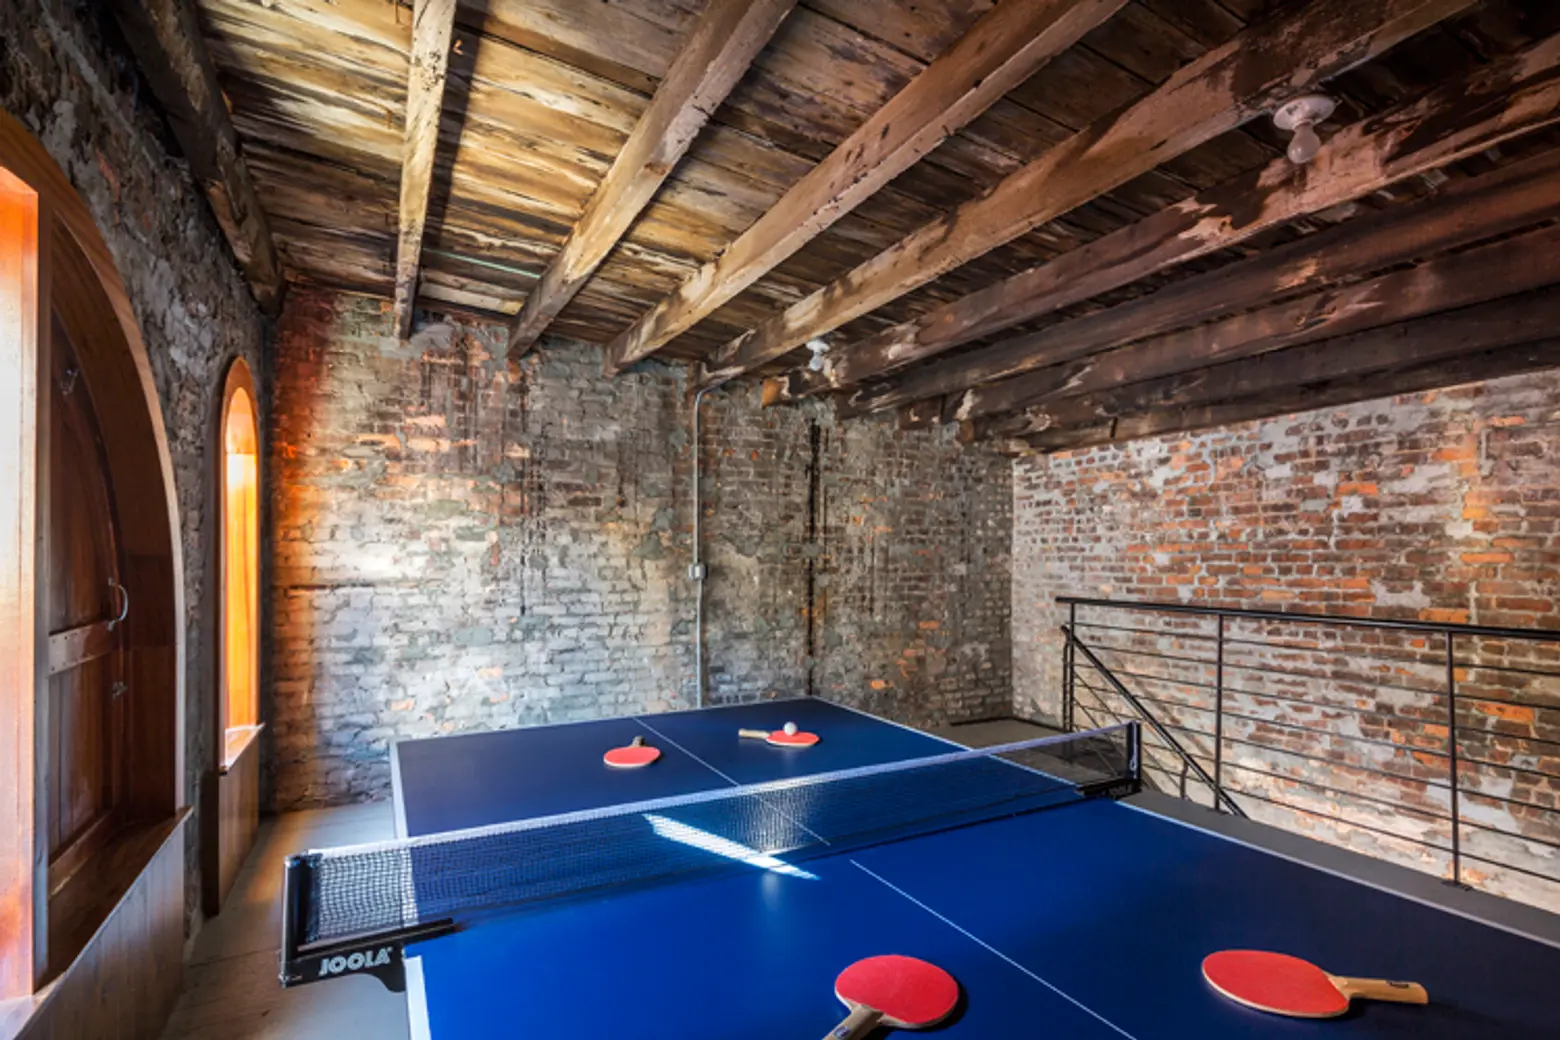 Ping pong table inside Reeve Place house designed by Barker Freeman